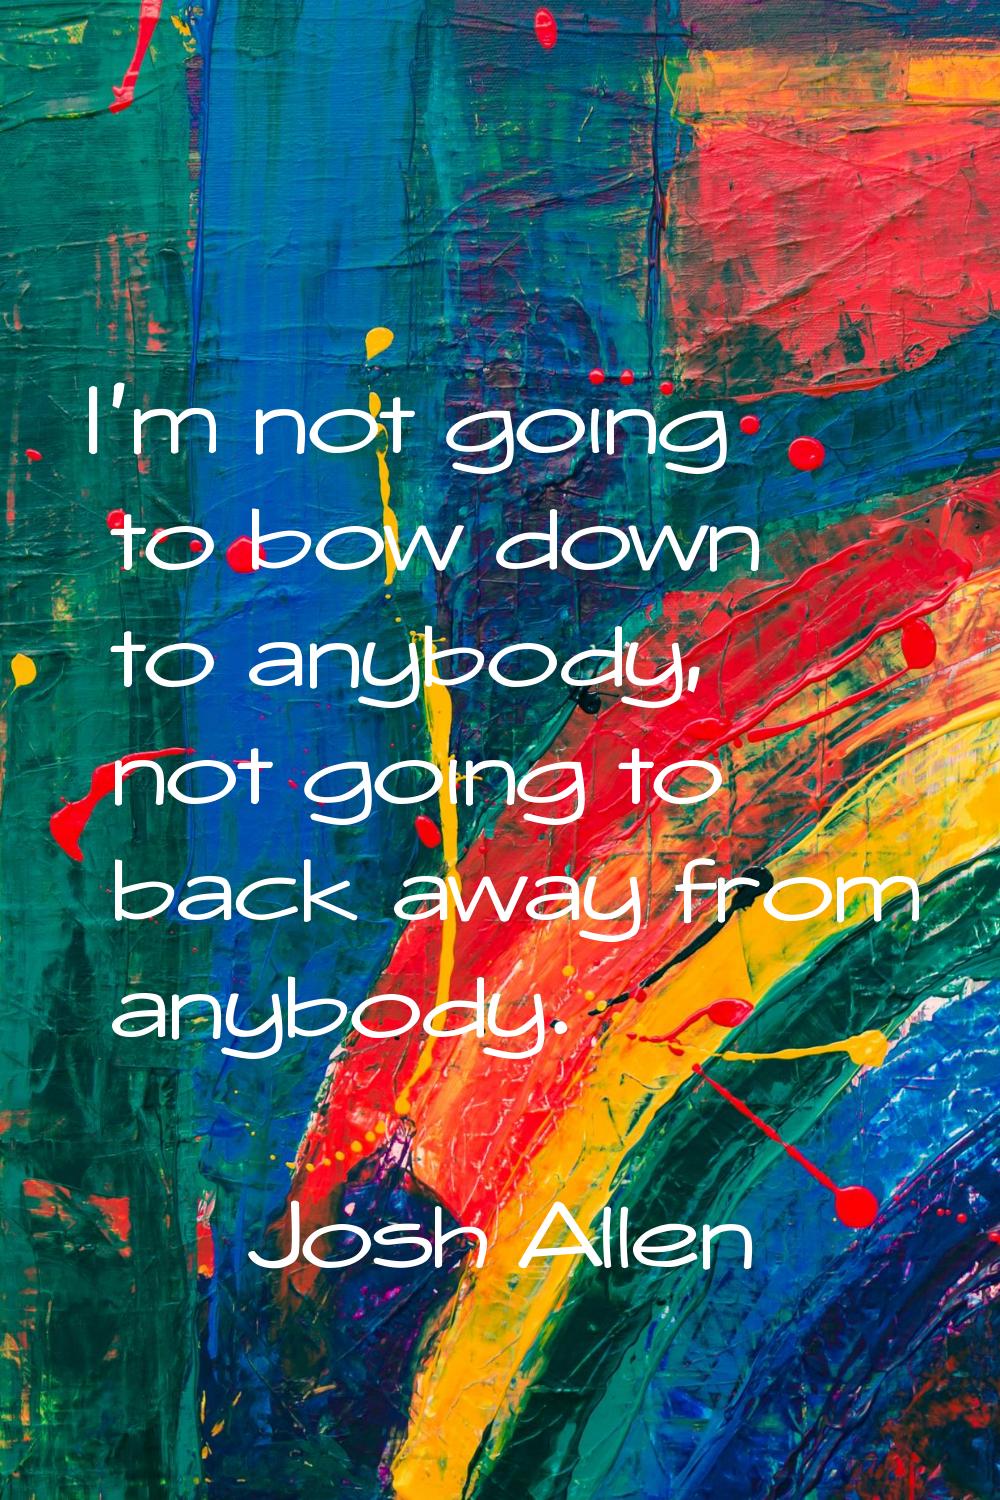 I'm not going to bow down to anybody, not going to back away from anybody.